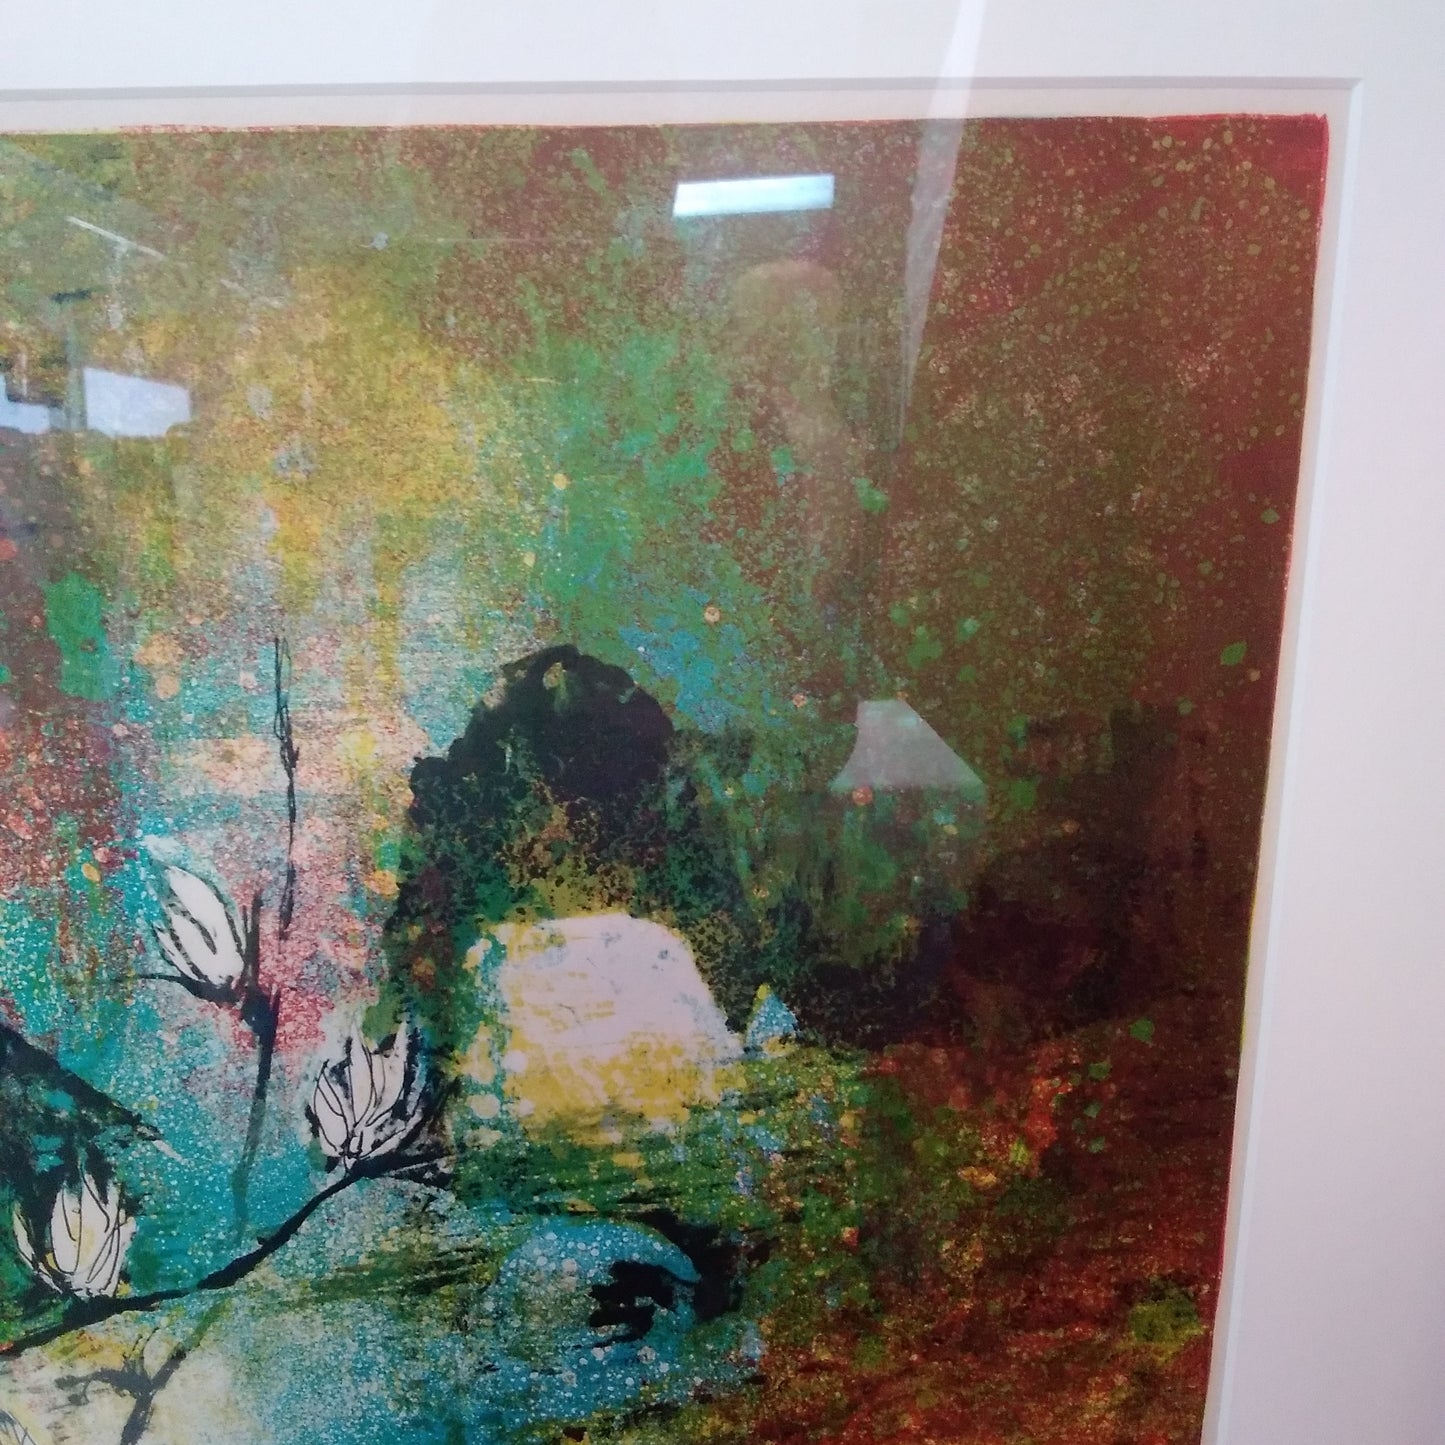 Beautiful Signed and Numbered  Lithograph Print by Hoi Lebadang - Print #49/250